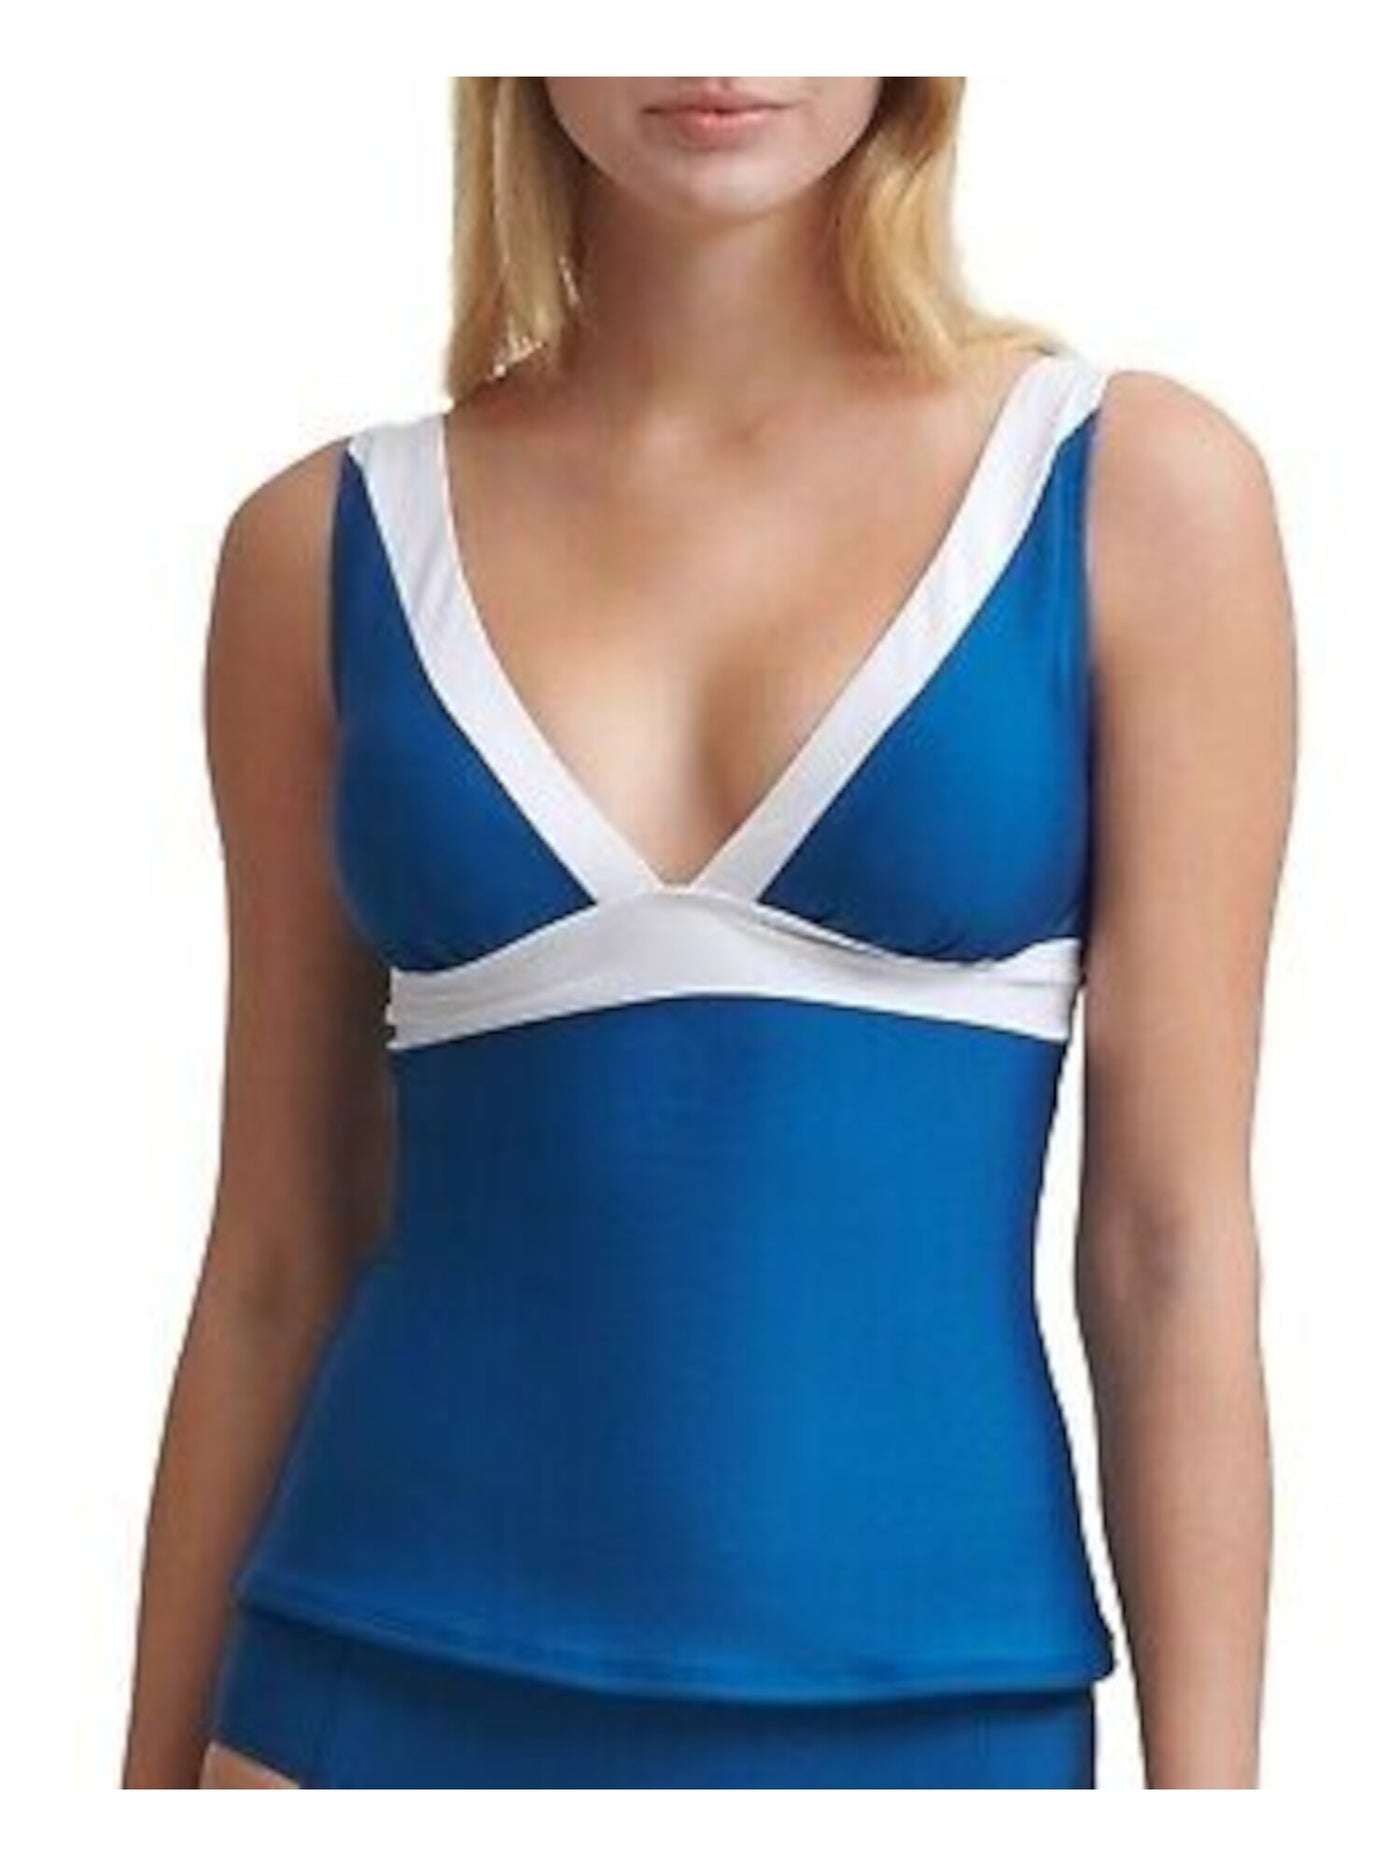 DKNY Women's Navy Color Block Removable Soft Cups Deep V Neck Adjustable Tankini Swimsuit Top XL